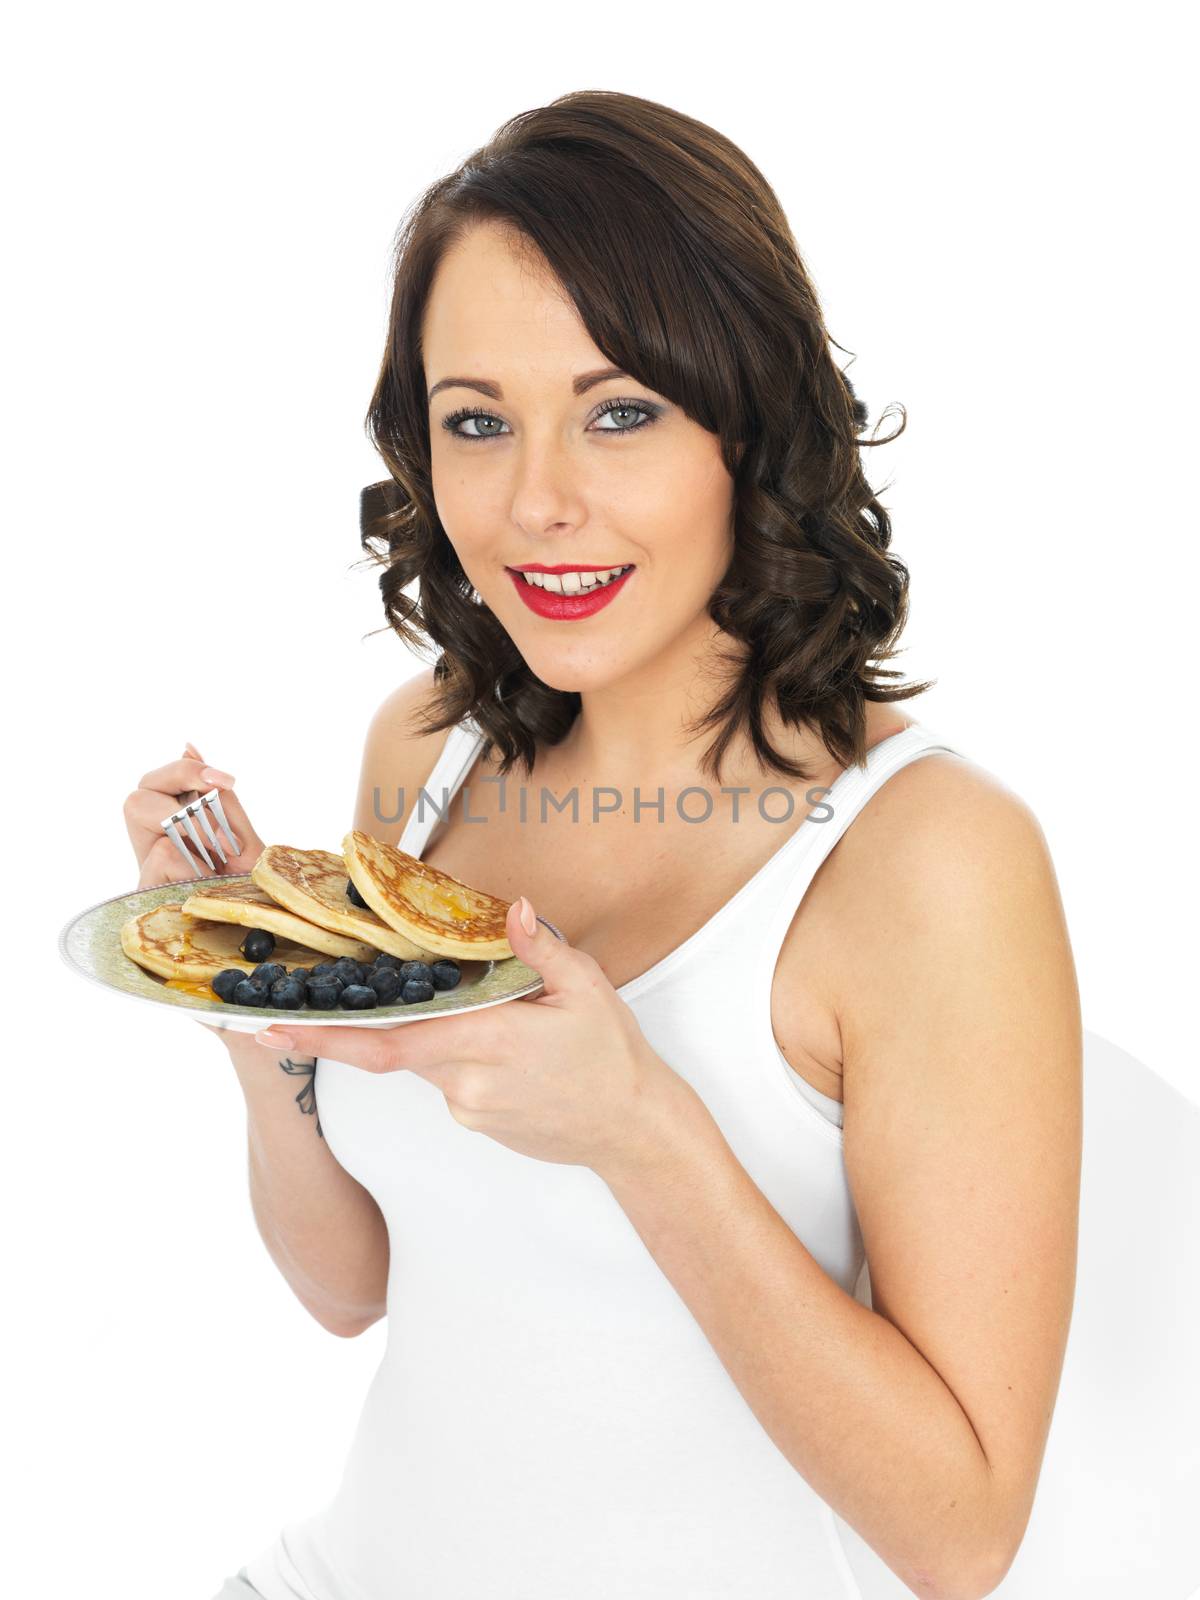 Young Woman Eating Pancakes with Blueberries by Whiteboxmedia